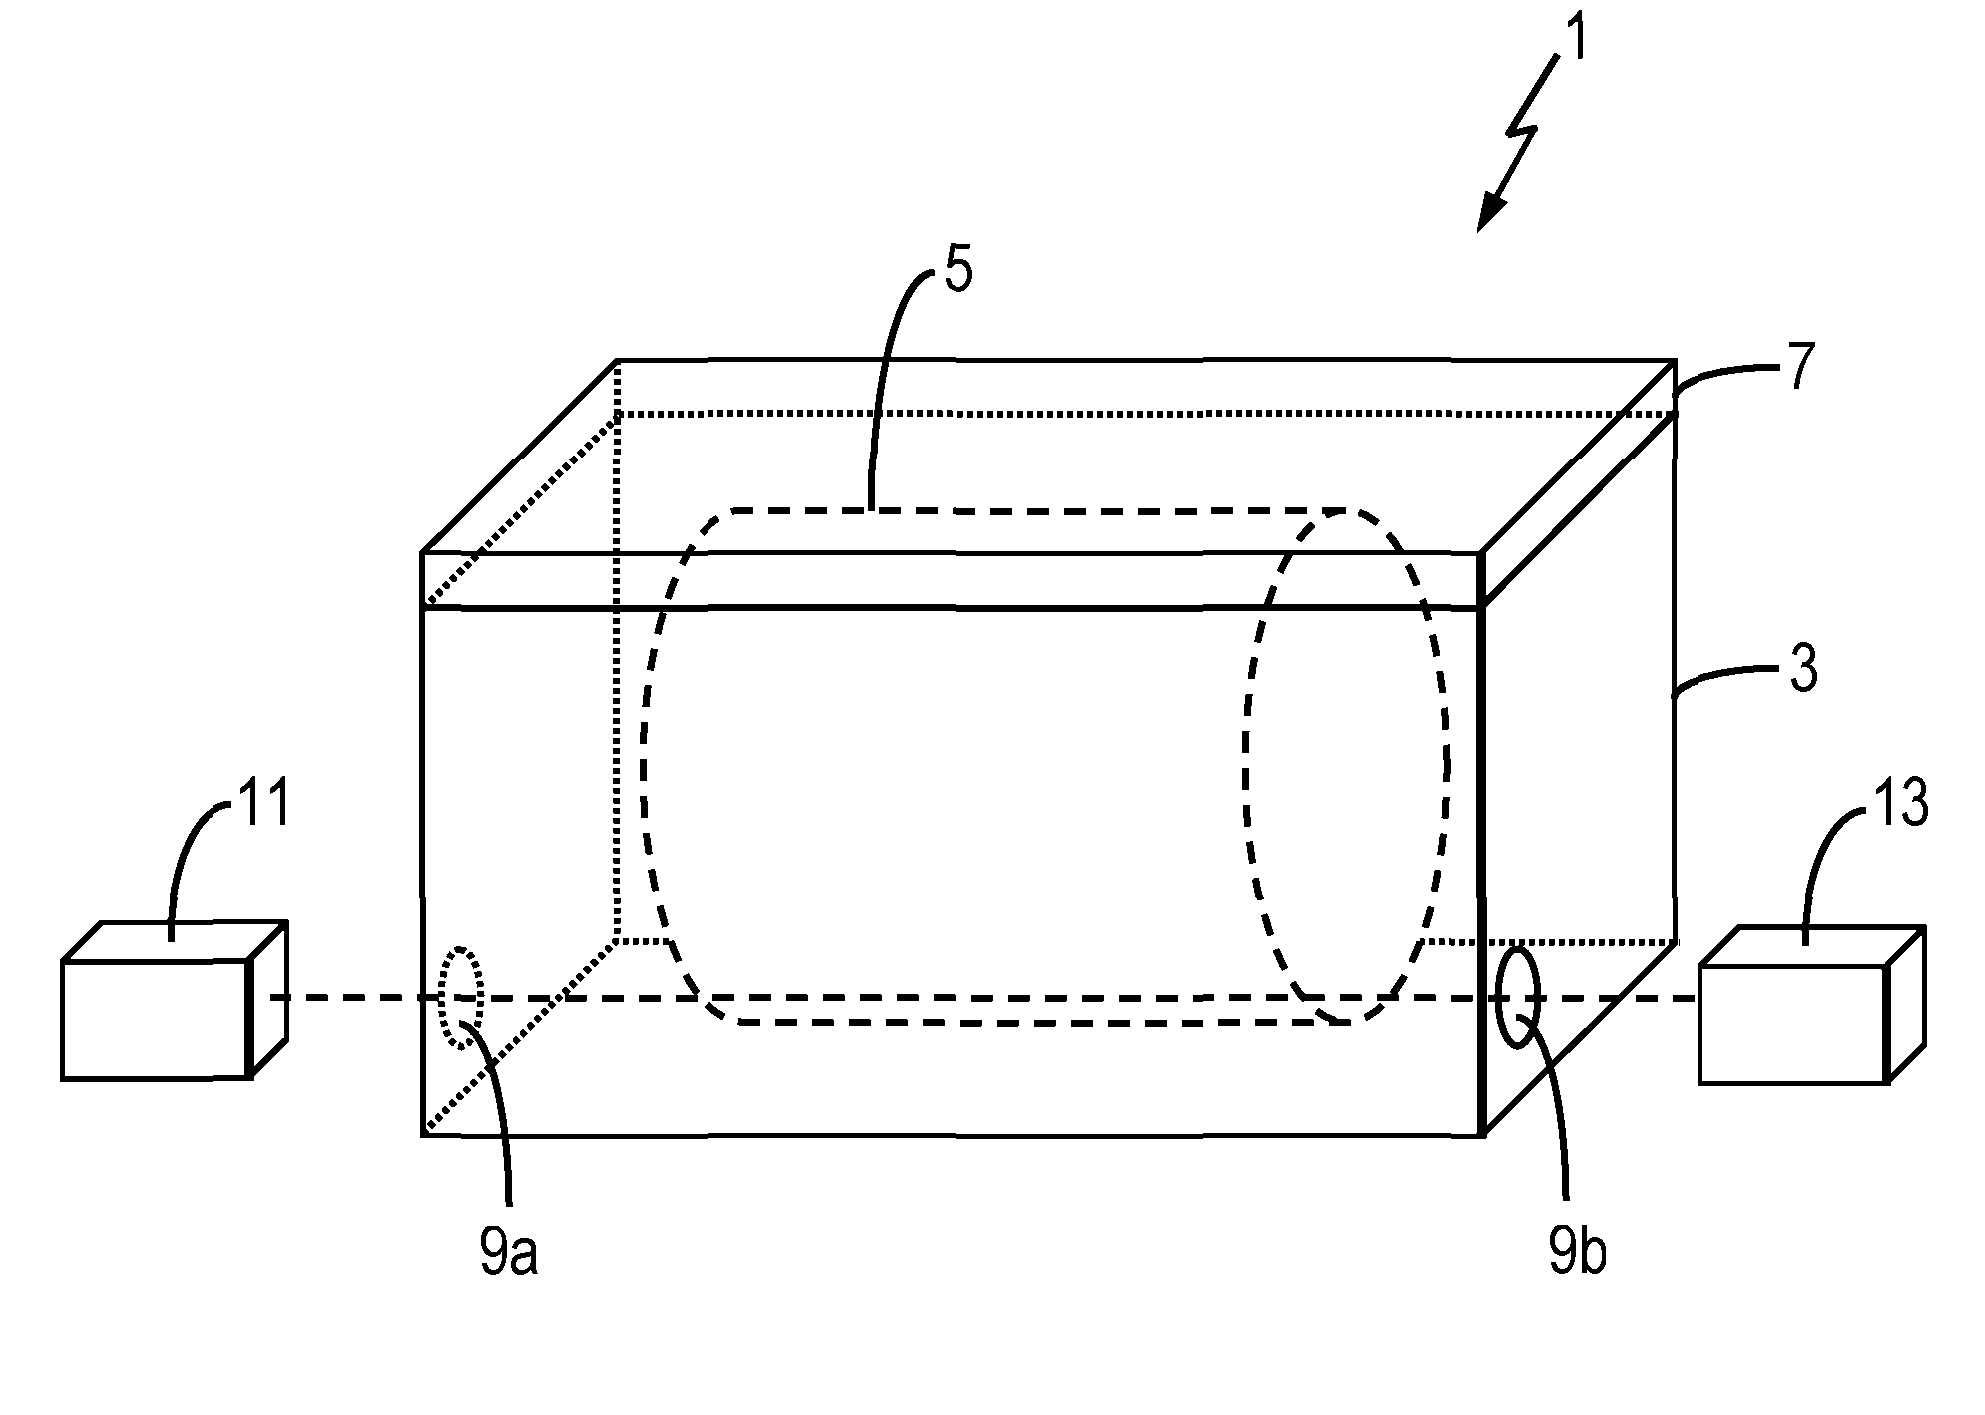 Maturation apparatus and methods